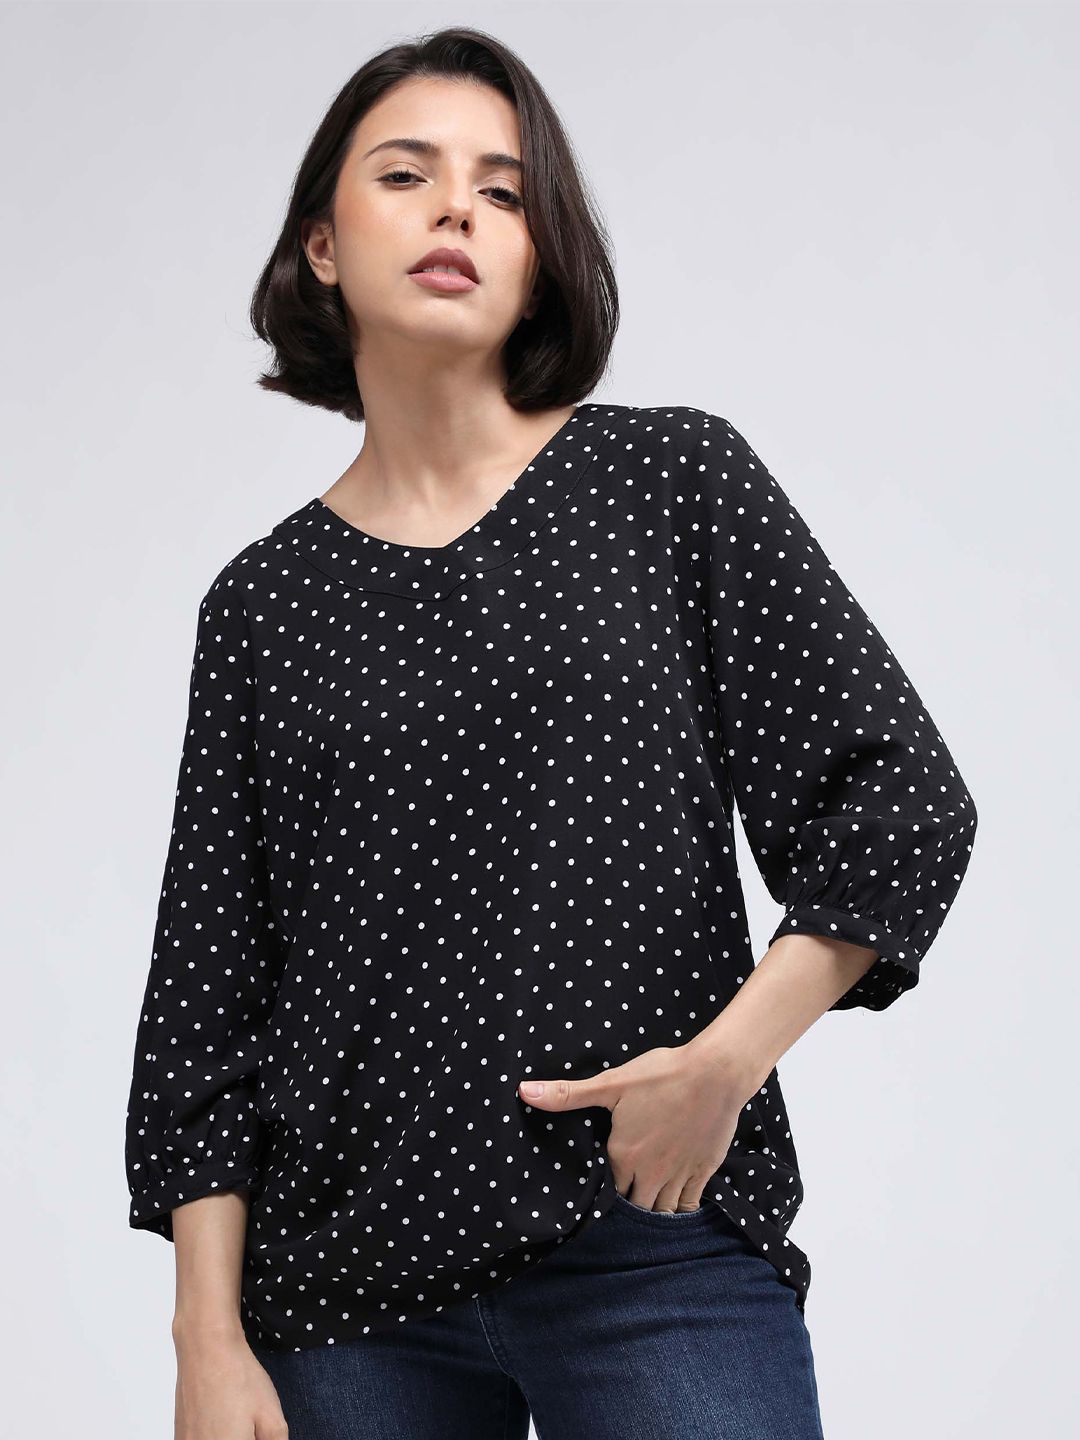 IDK Polka Dot Printed Puff Sleeves Top Price in India